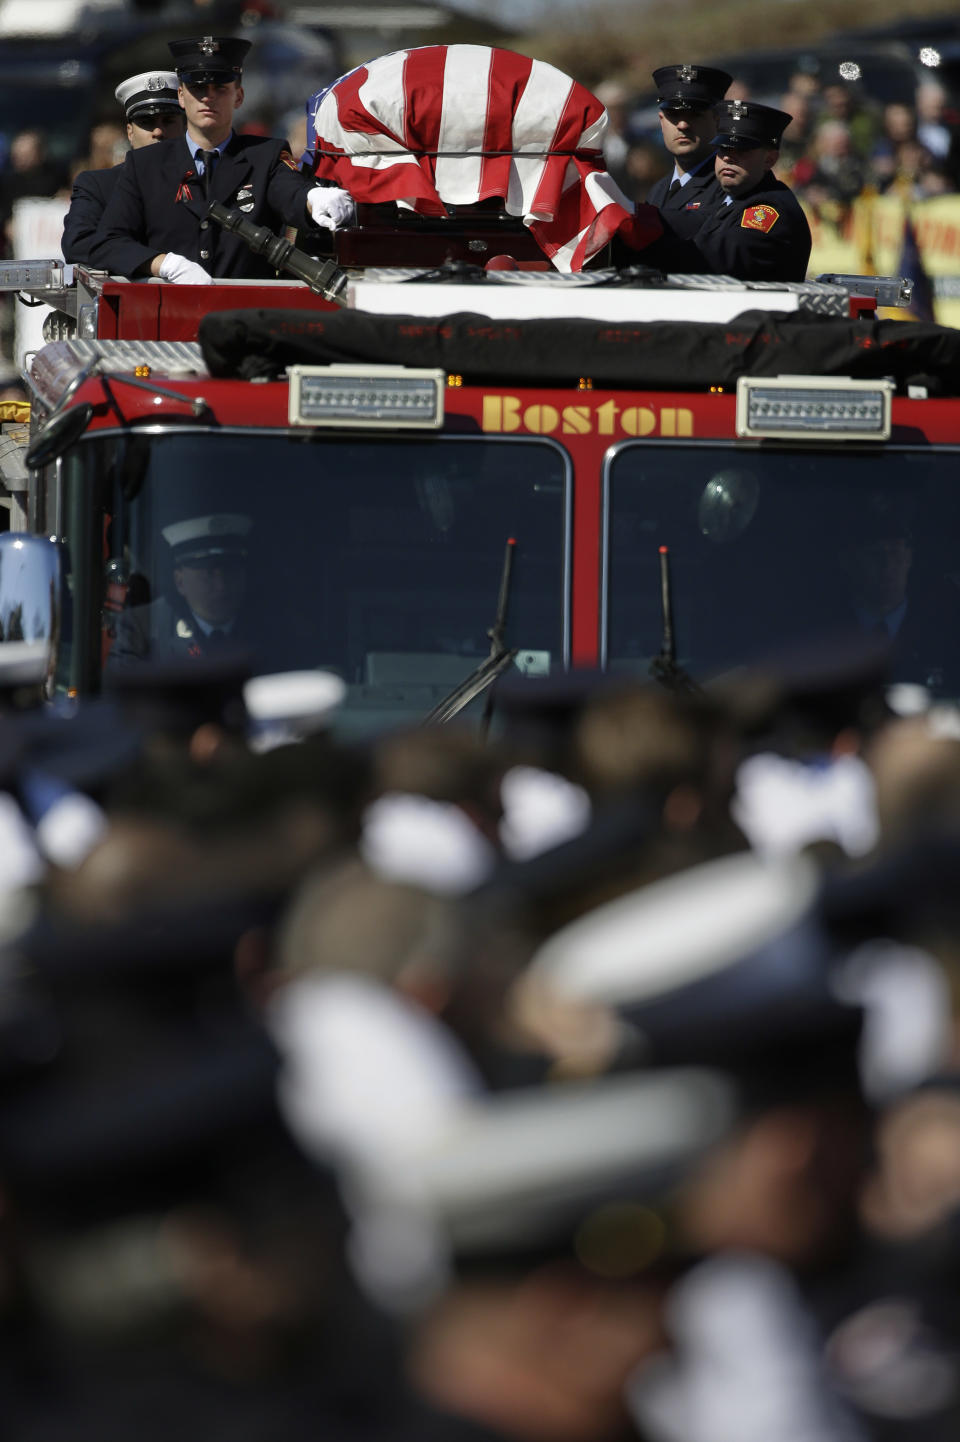 The funeral procession for Boston firefighter Michael R. Kennedy proceeds through saluting firefighters as it approaches Holy Name Church in Boston, Thursday, April 3, 2014. Kennedy and Boston Fire Lt. Edward J. Walsh were killed Wednesday, March 26, 2014 when they were trapped in the basement of a burning brownstone during a nine-alarm blaze.(AP Photo/Stephan Savoia)